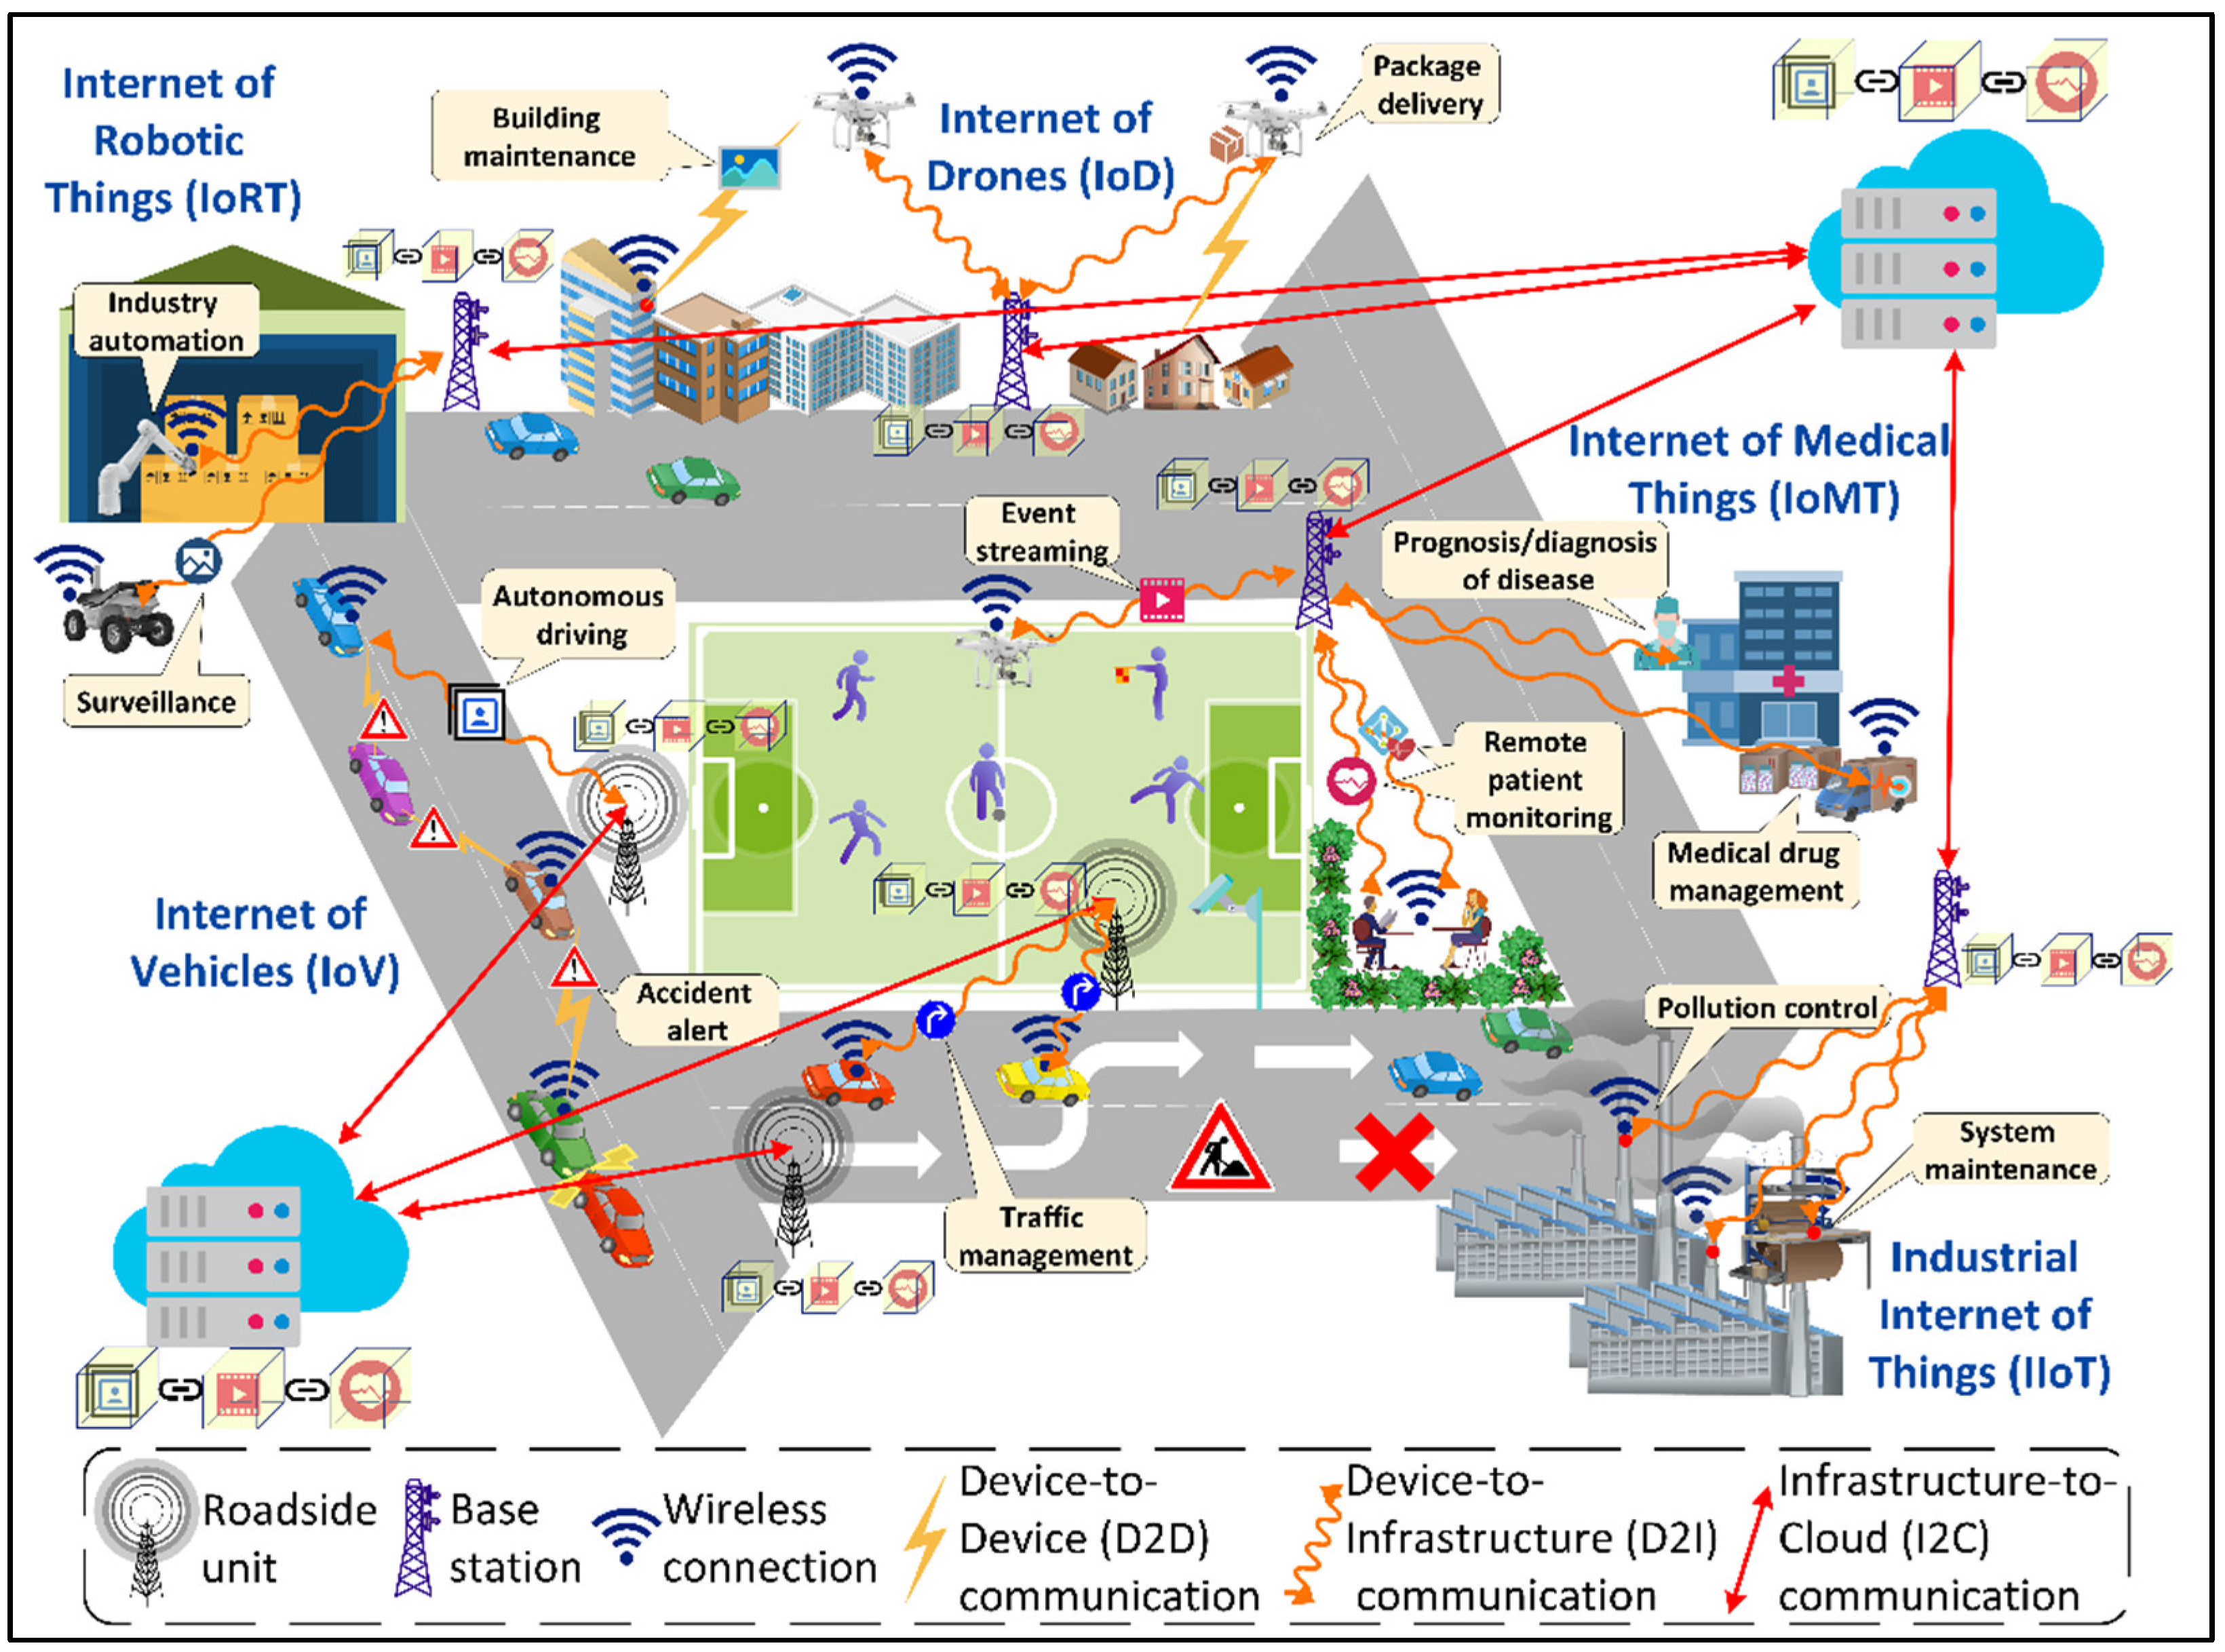 Sensors | Free Full-Text Future and Smart and 6G Applications Artificial Cities Taxonomy, Challenges, Digital Networks Intelligence Directions | Ecosystems: Self-Learning for